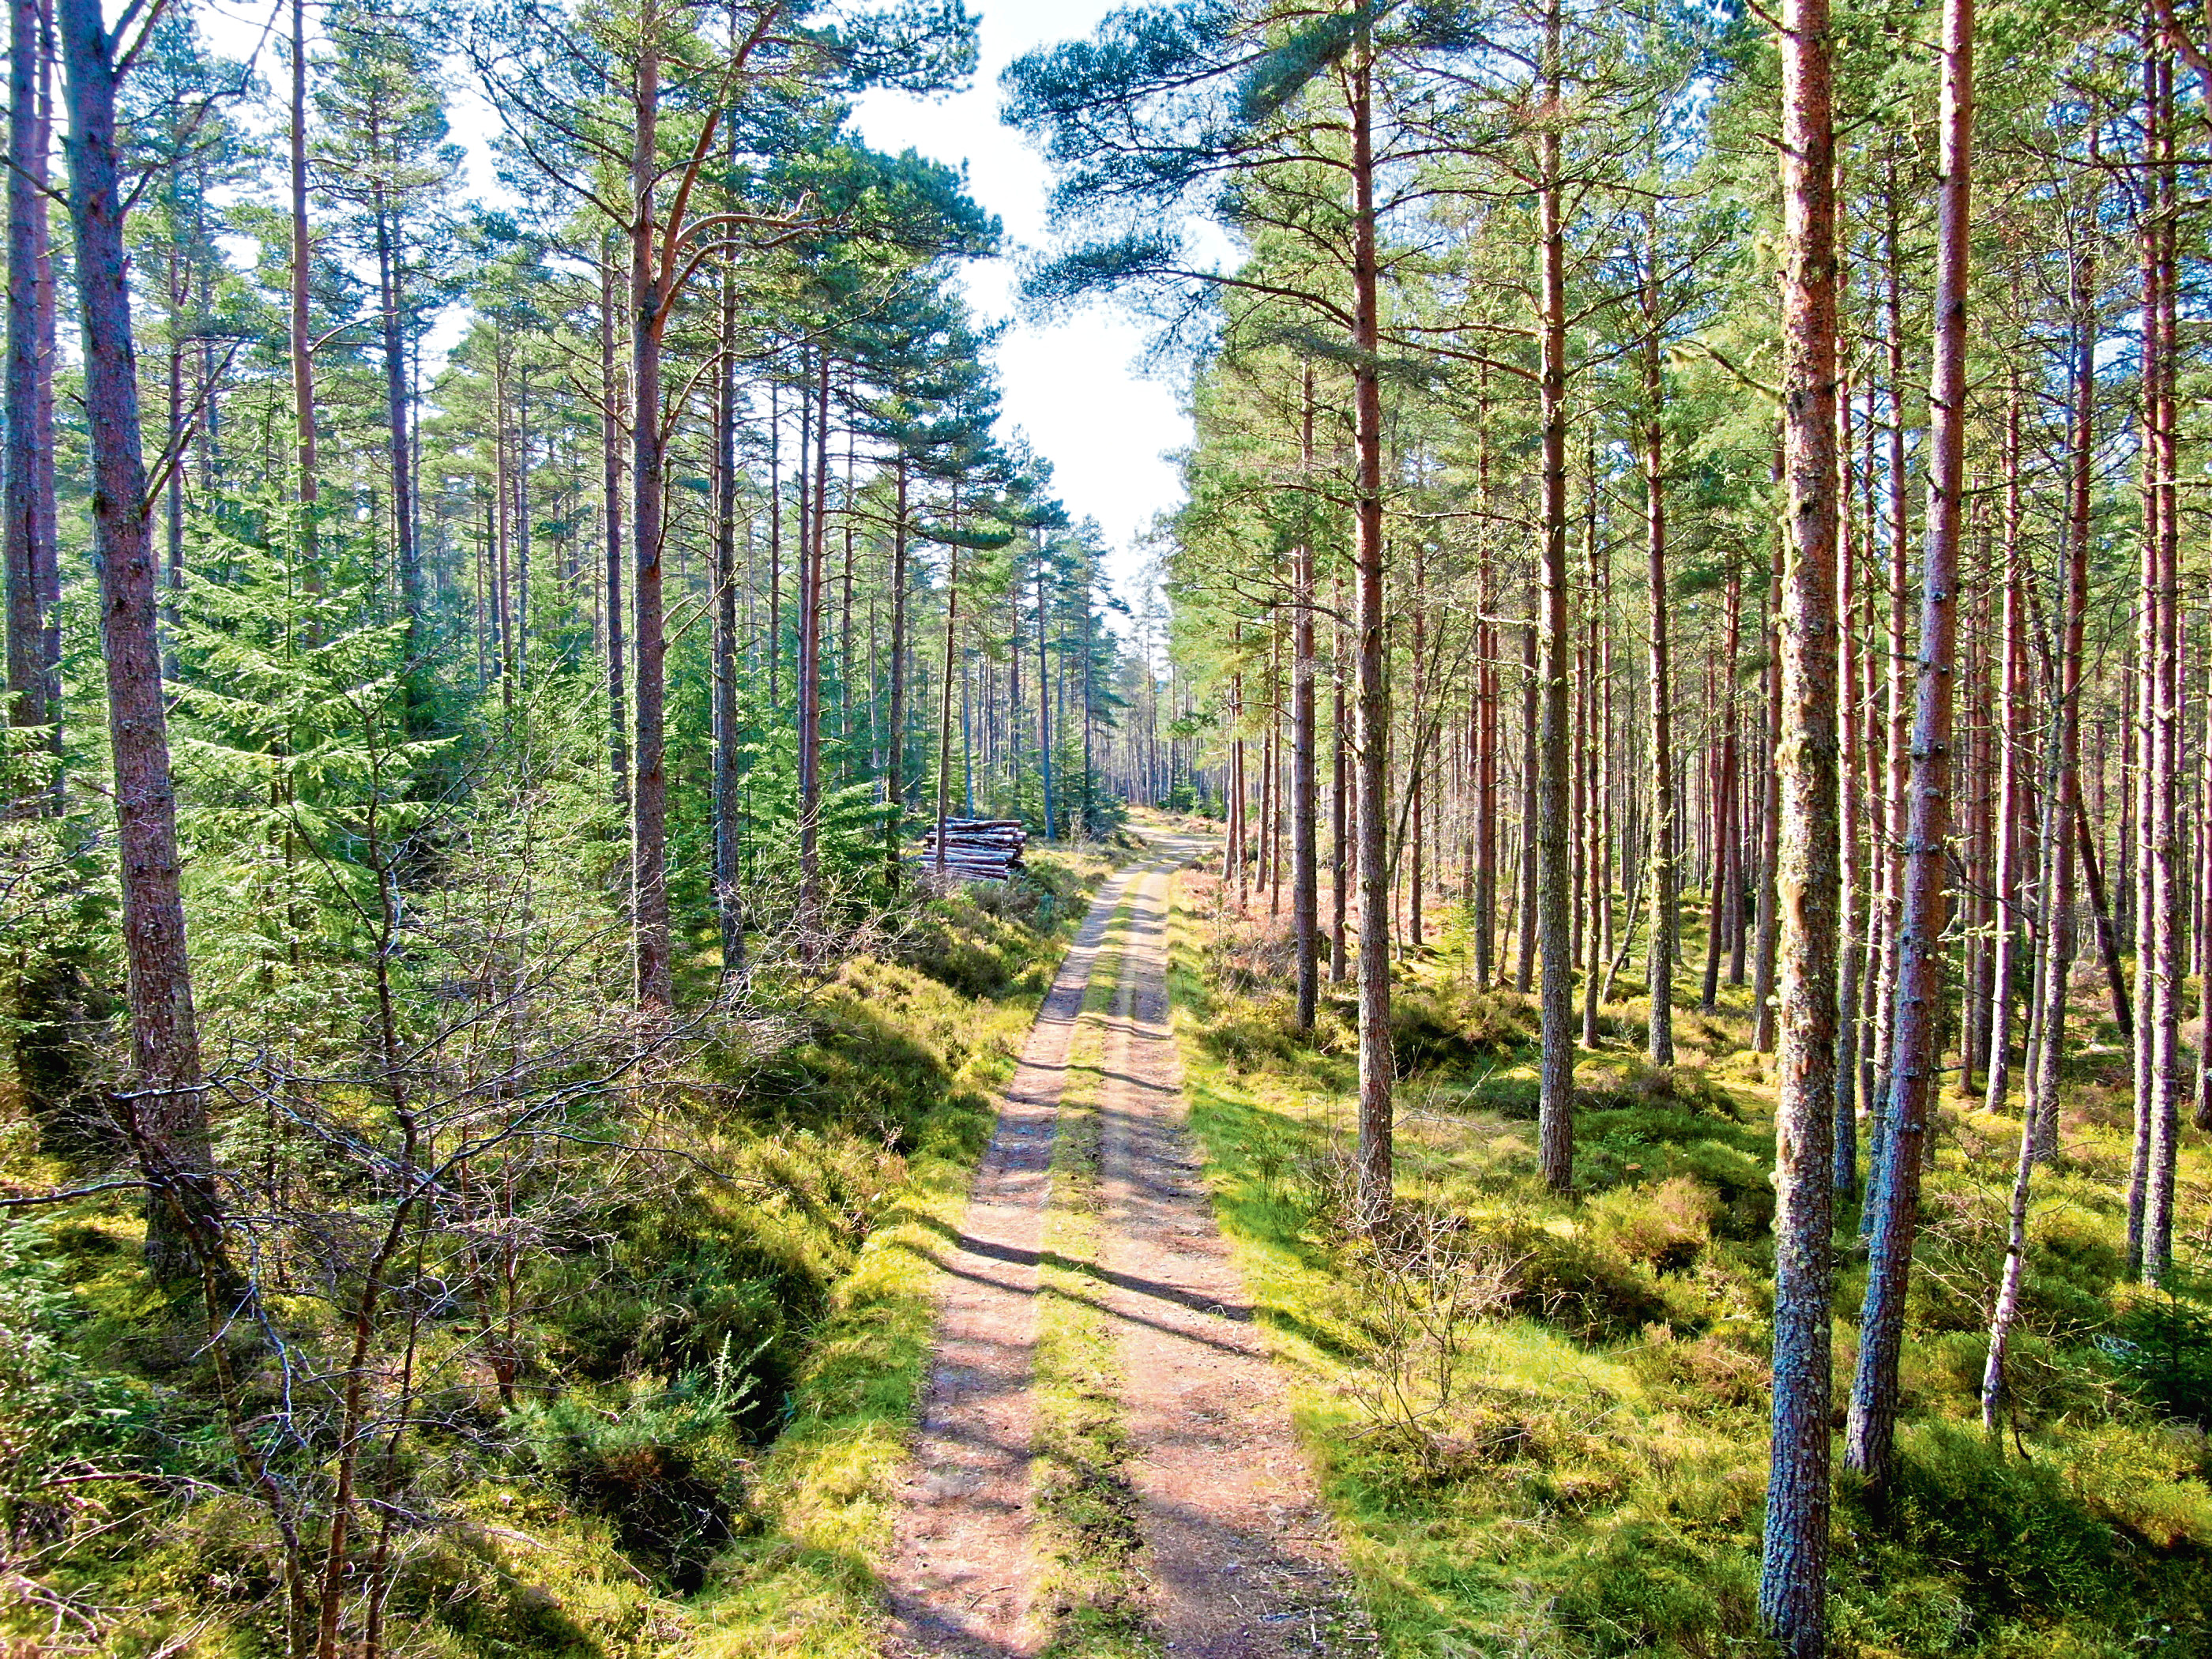 The Scottish Government’s planting target of 25,000 acres was exceeded this year, with 27,700 acres of new woodland, according to the UK Forest Market Report.